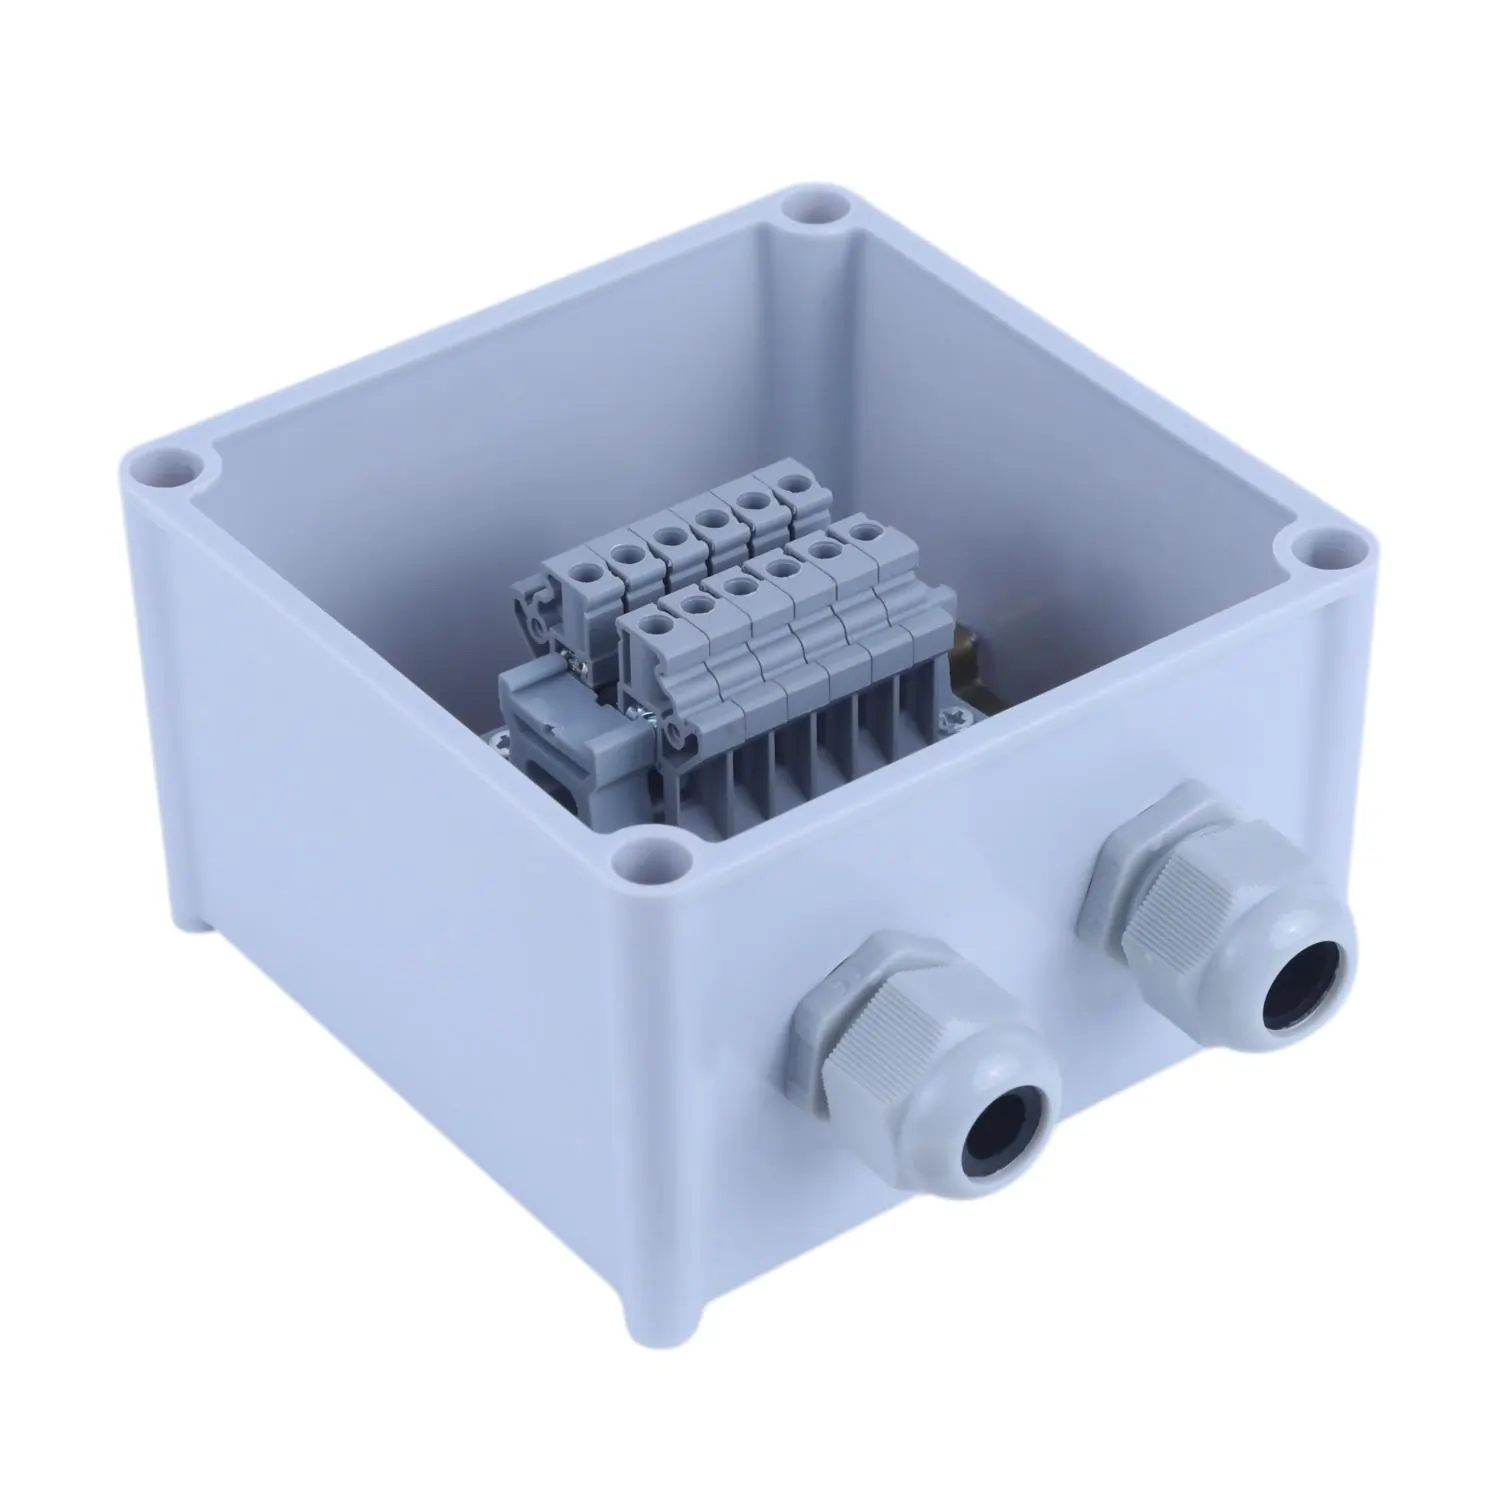 Terminal Junction Box with 6 Terminal 4 sqmm & 2 Glands iso